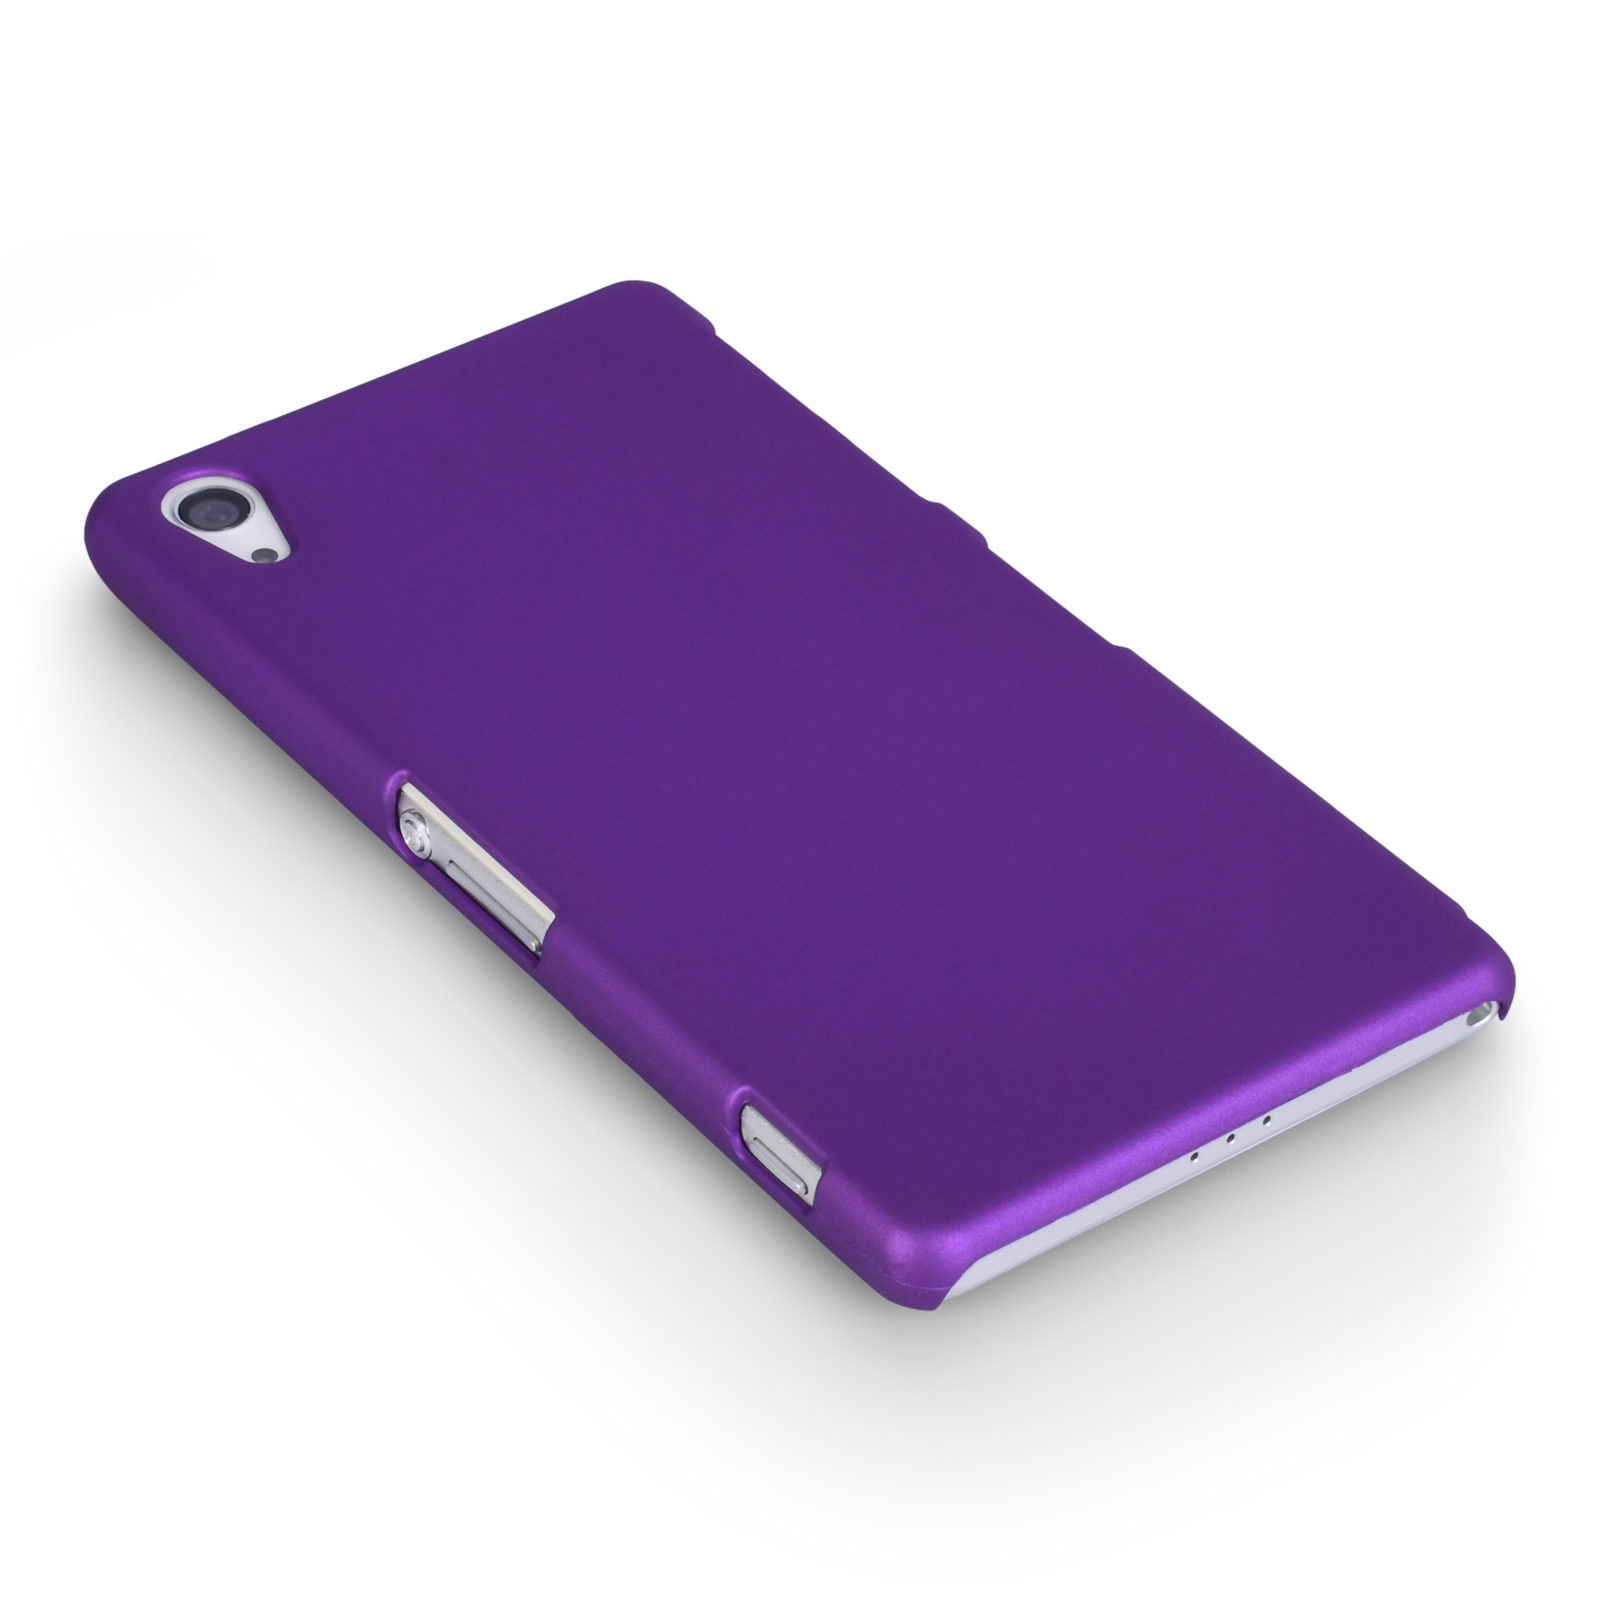 YouSave Accessories Sony Xperia Z2 Hard Hybrid Case - Purple